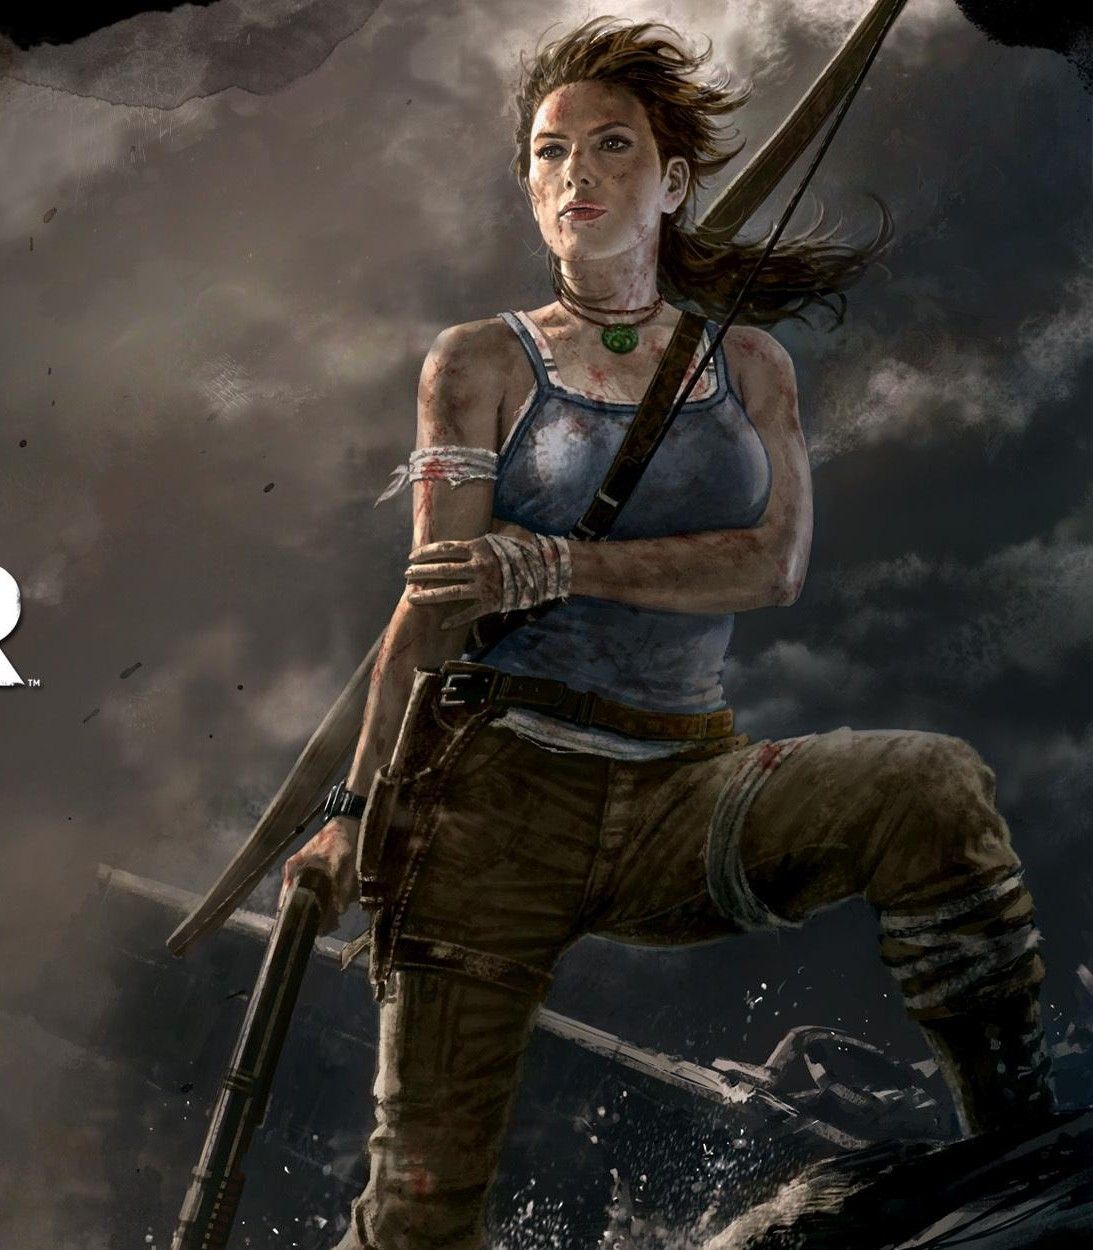 Tomb Raider 2013 video game TLDR